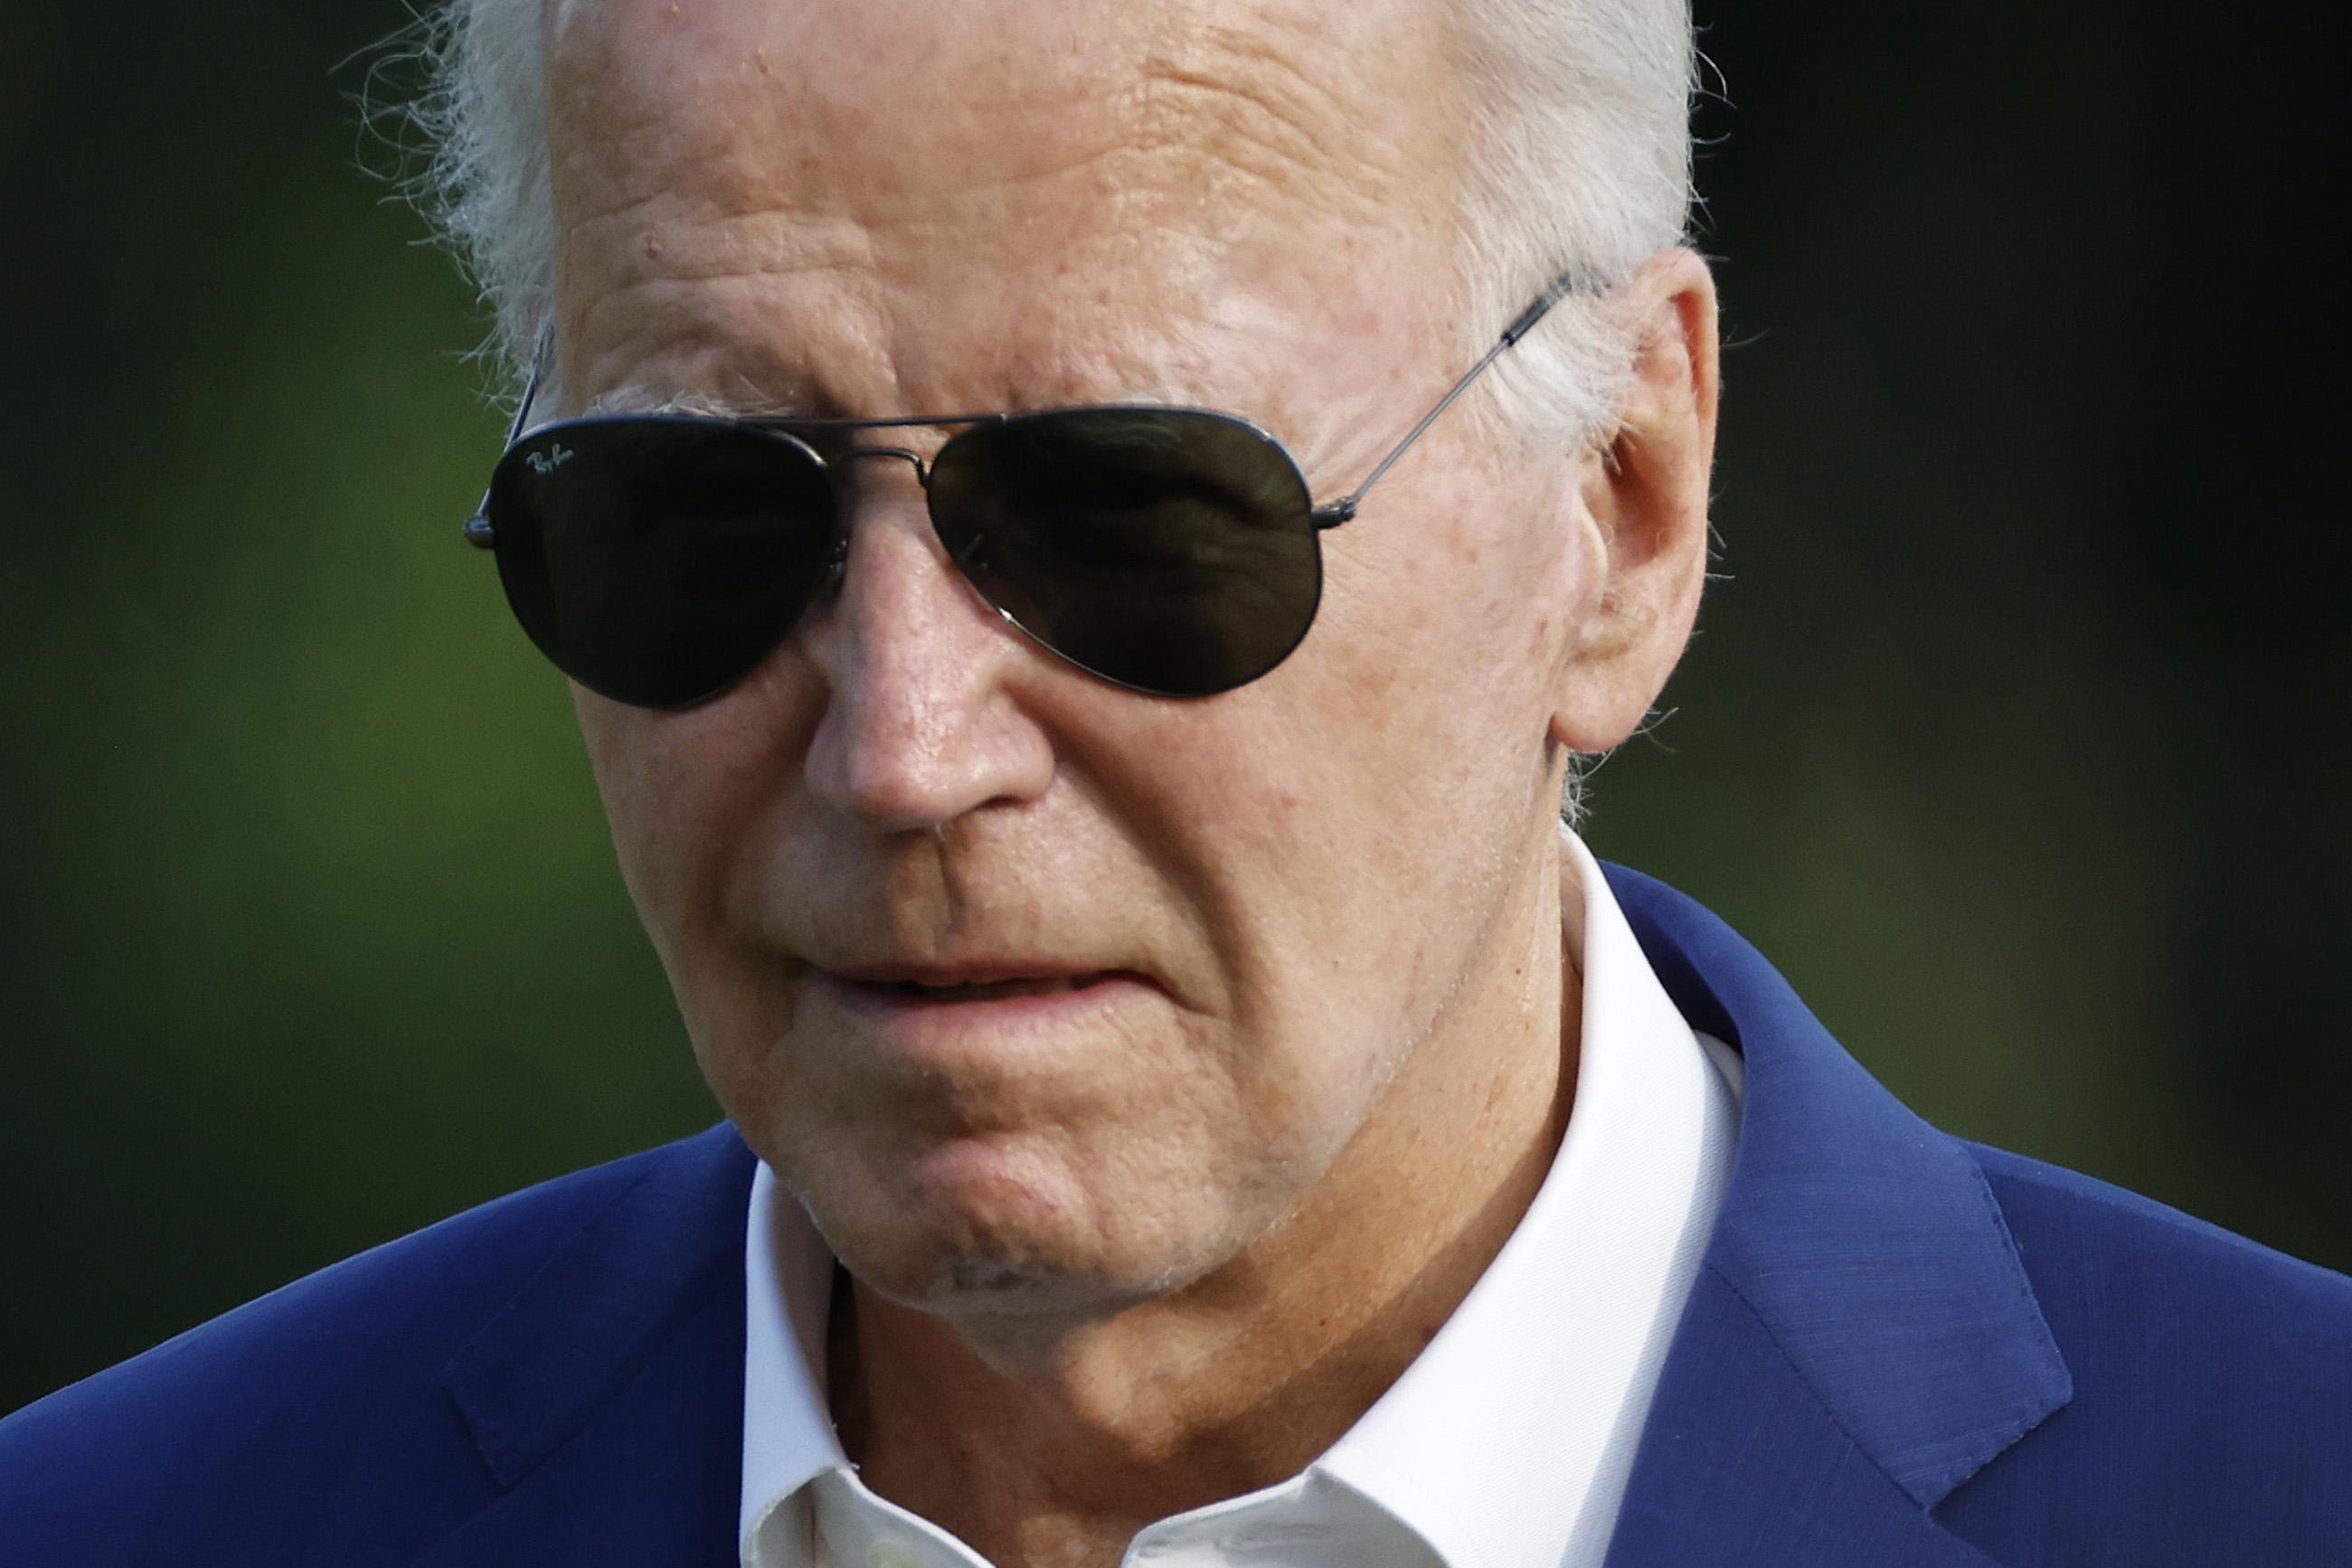 Good News! There’s Still Plenty of Time for Joe Biden to Prove That He Should Definitely Drop Out.